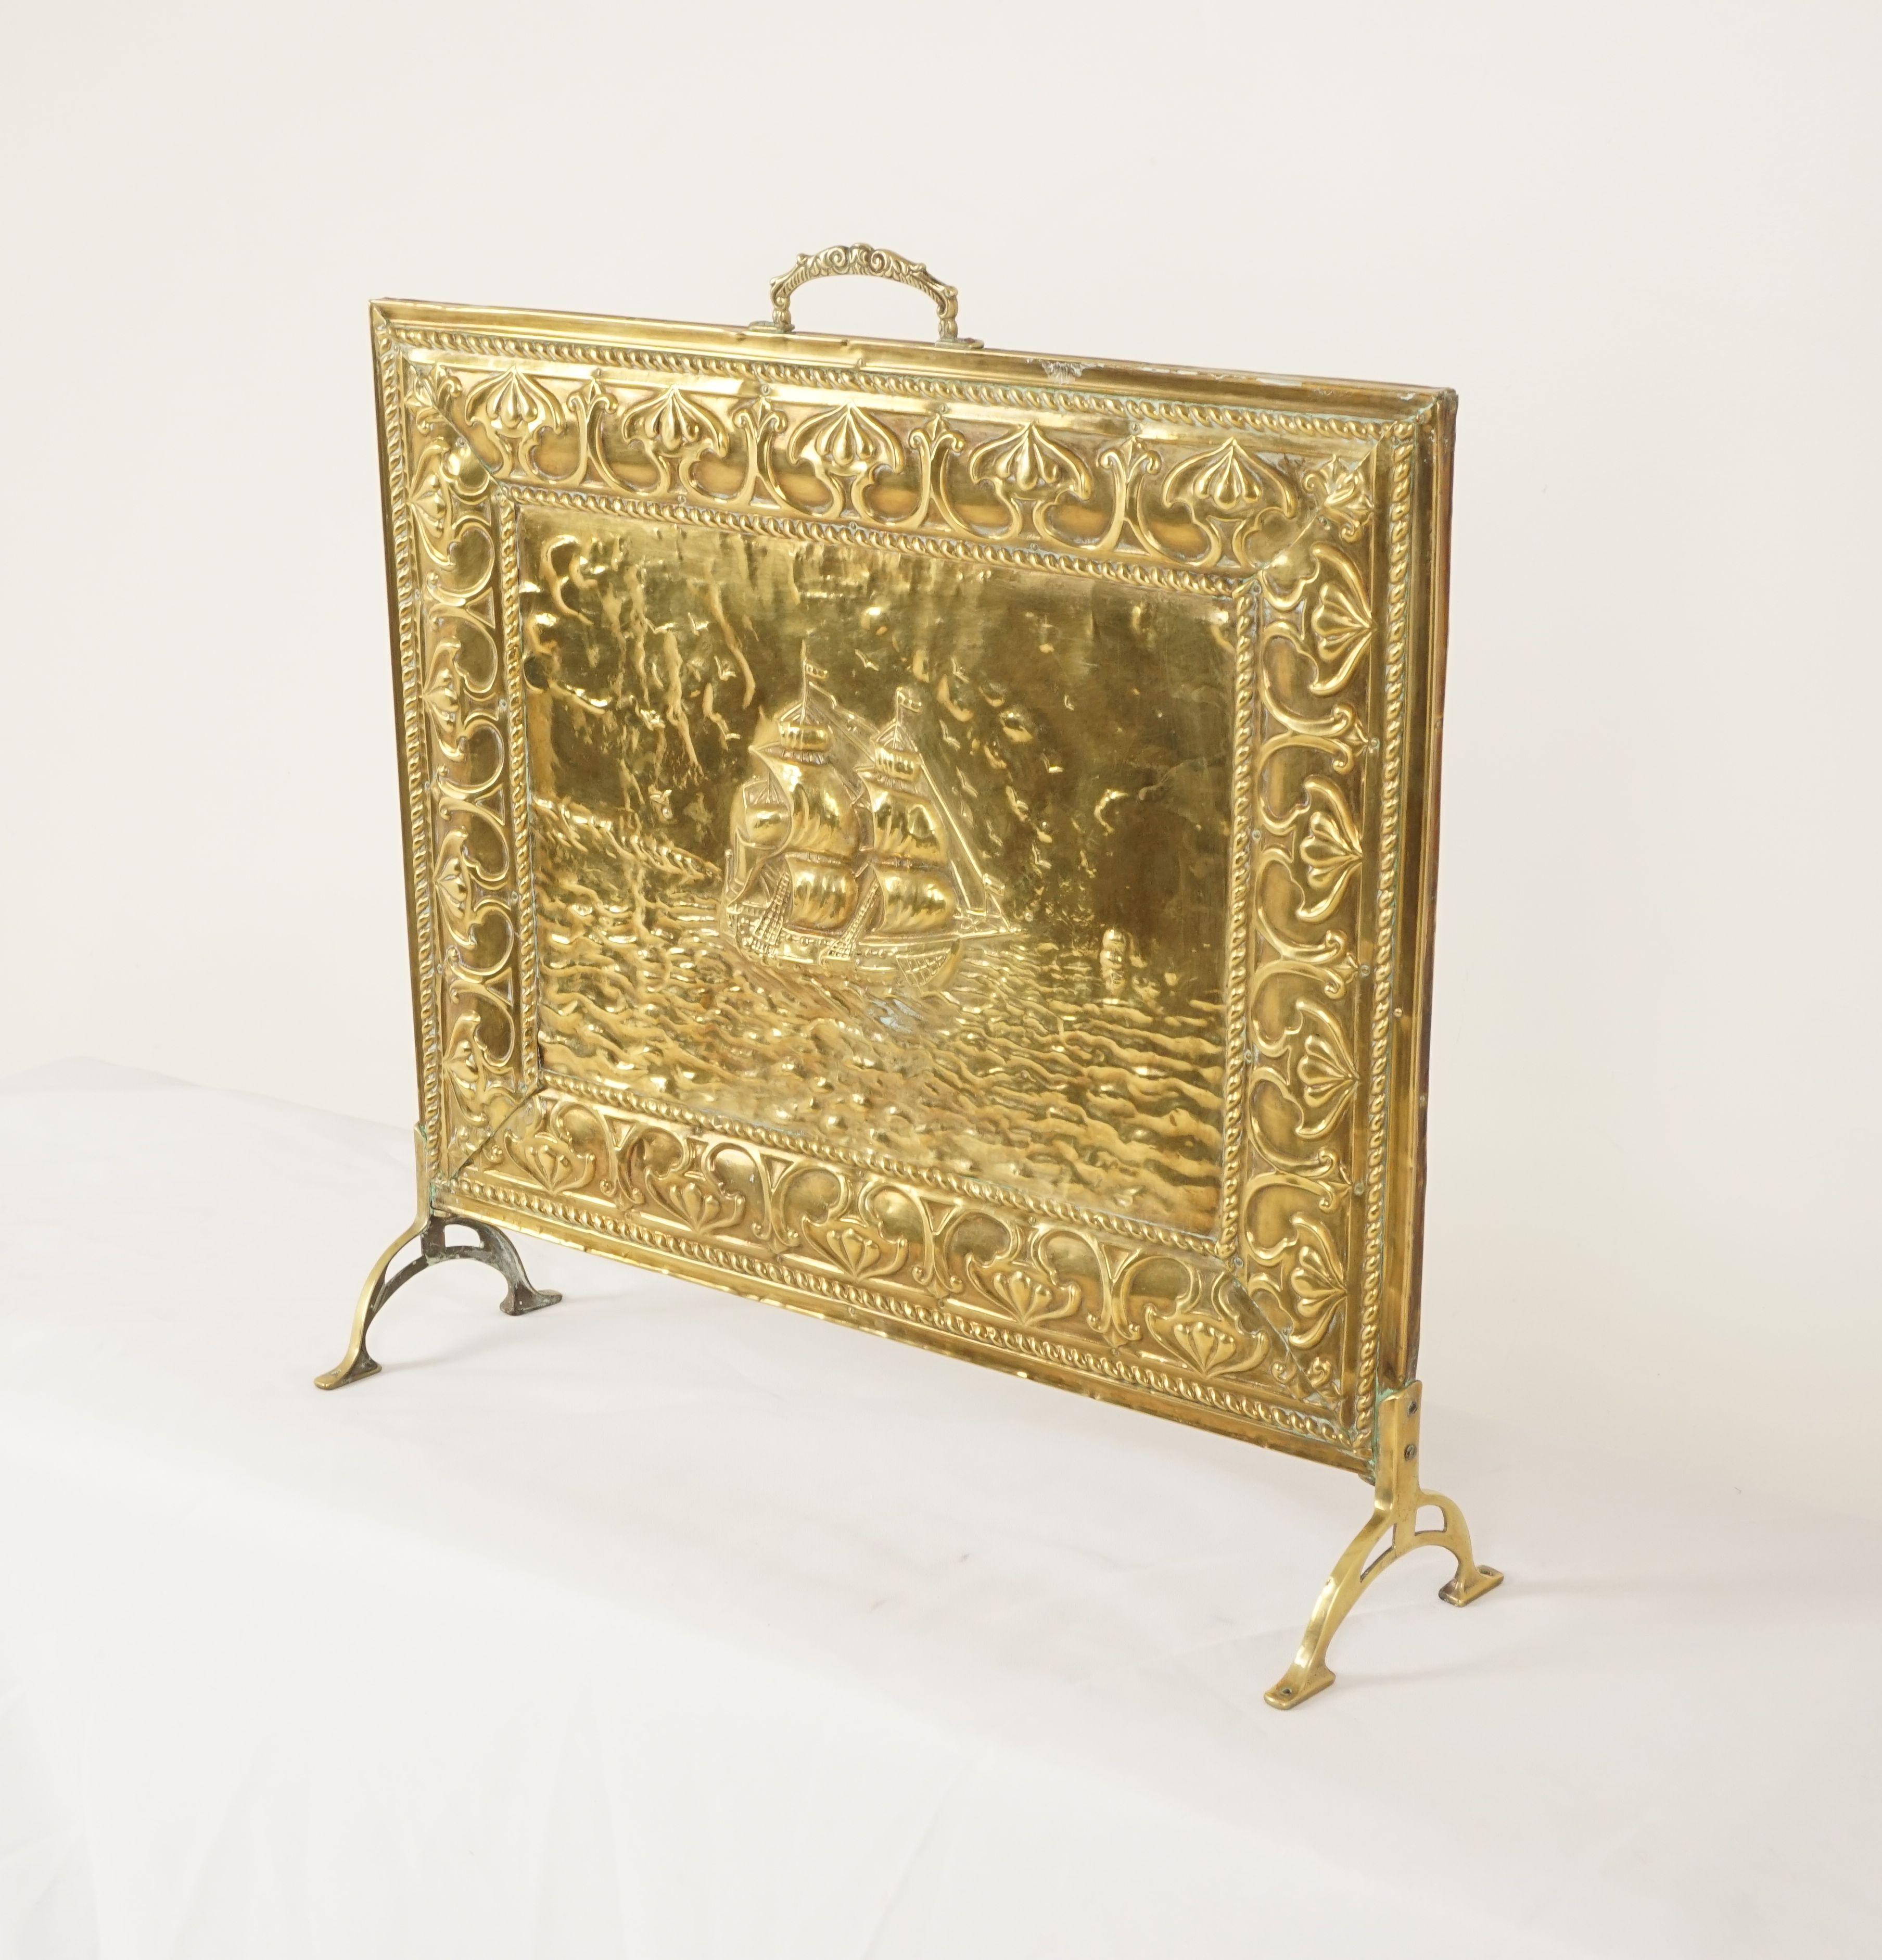 Vintage Art Nouveau fire screen, brass, Scotland 1930, B2490

Scotland, 1930
Brass handles on top
Retailing Classic Art Nouveau design elements on front
Embossed sailing ship to the center
All standing on a pair of brass